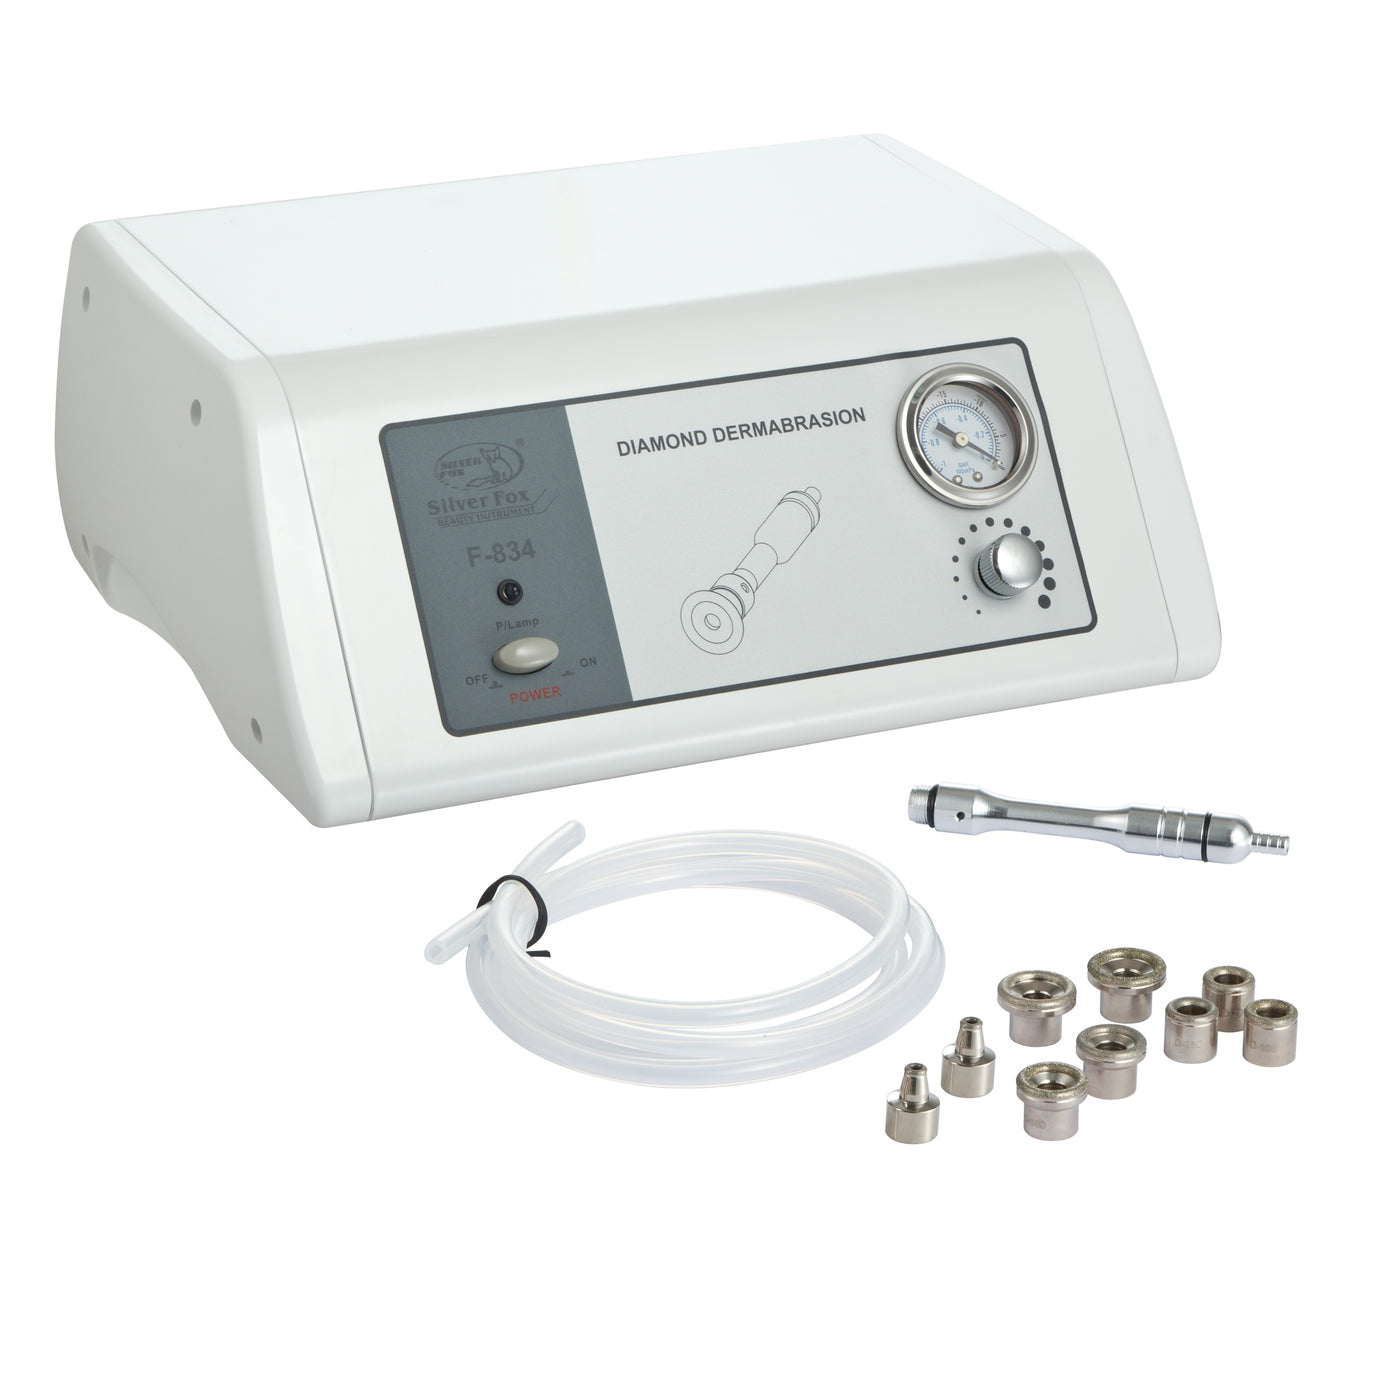 Microdermabrasion Instrument with Diamond Heads